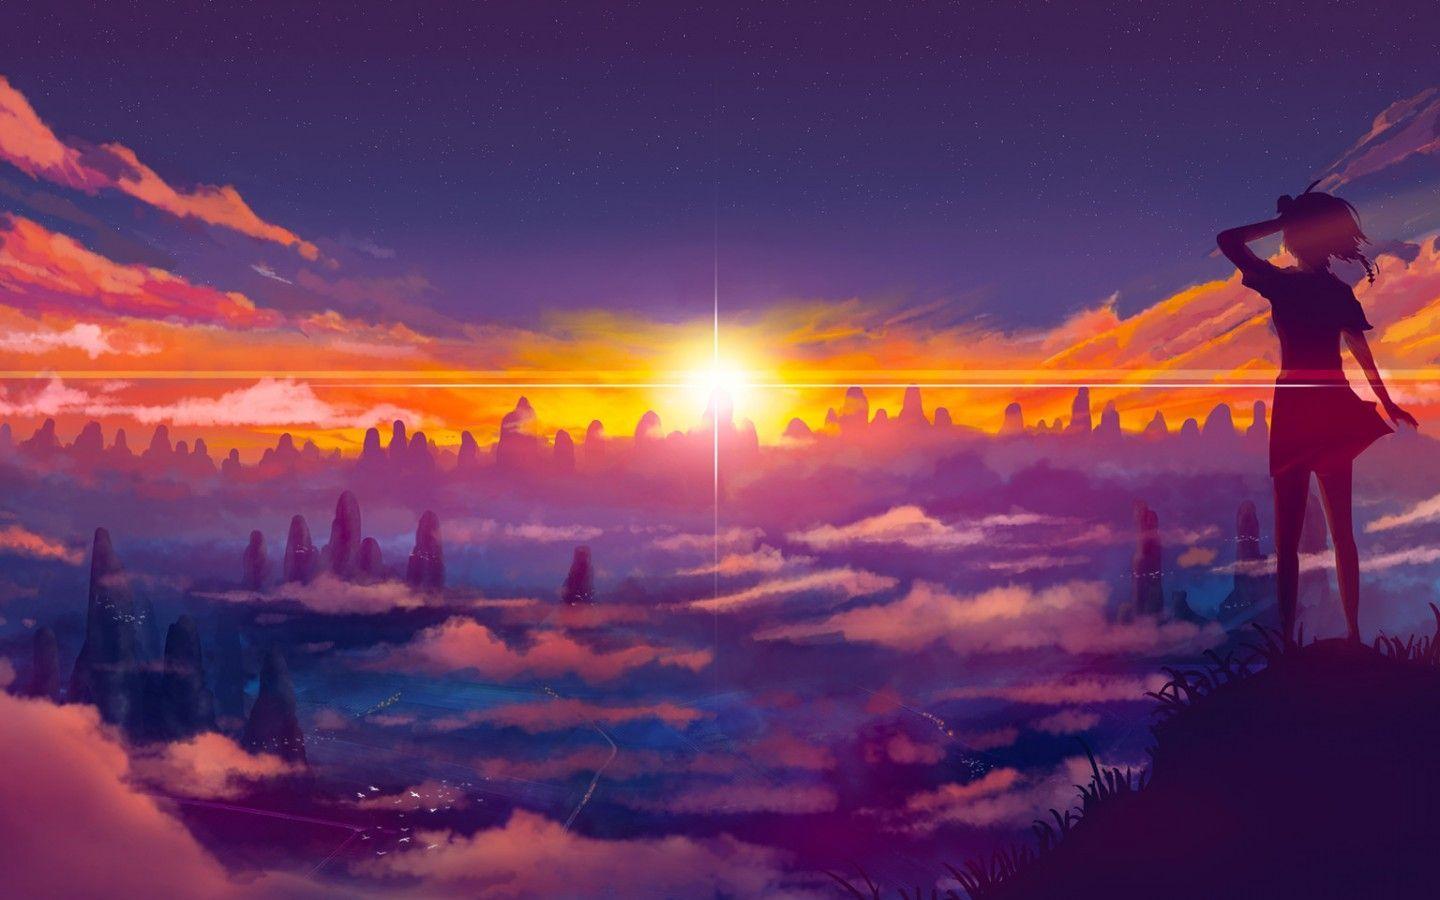 Anime girl standing on a hill watching the sunset - 1440x900